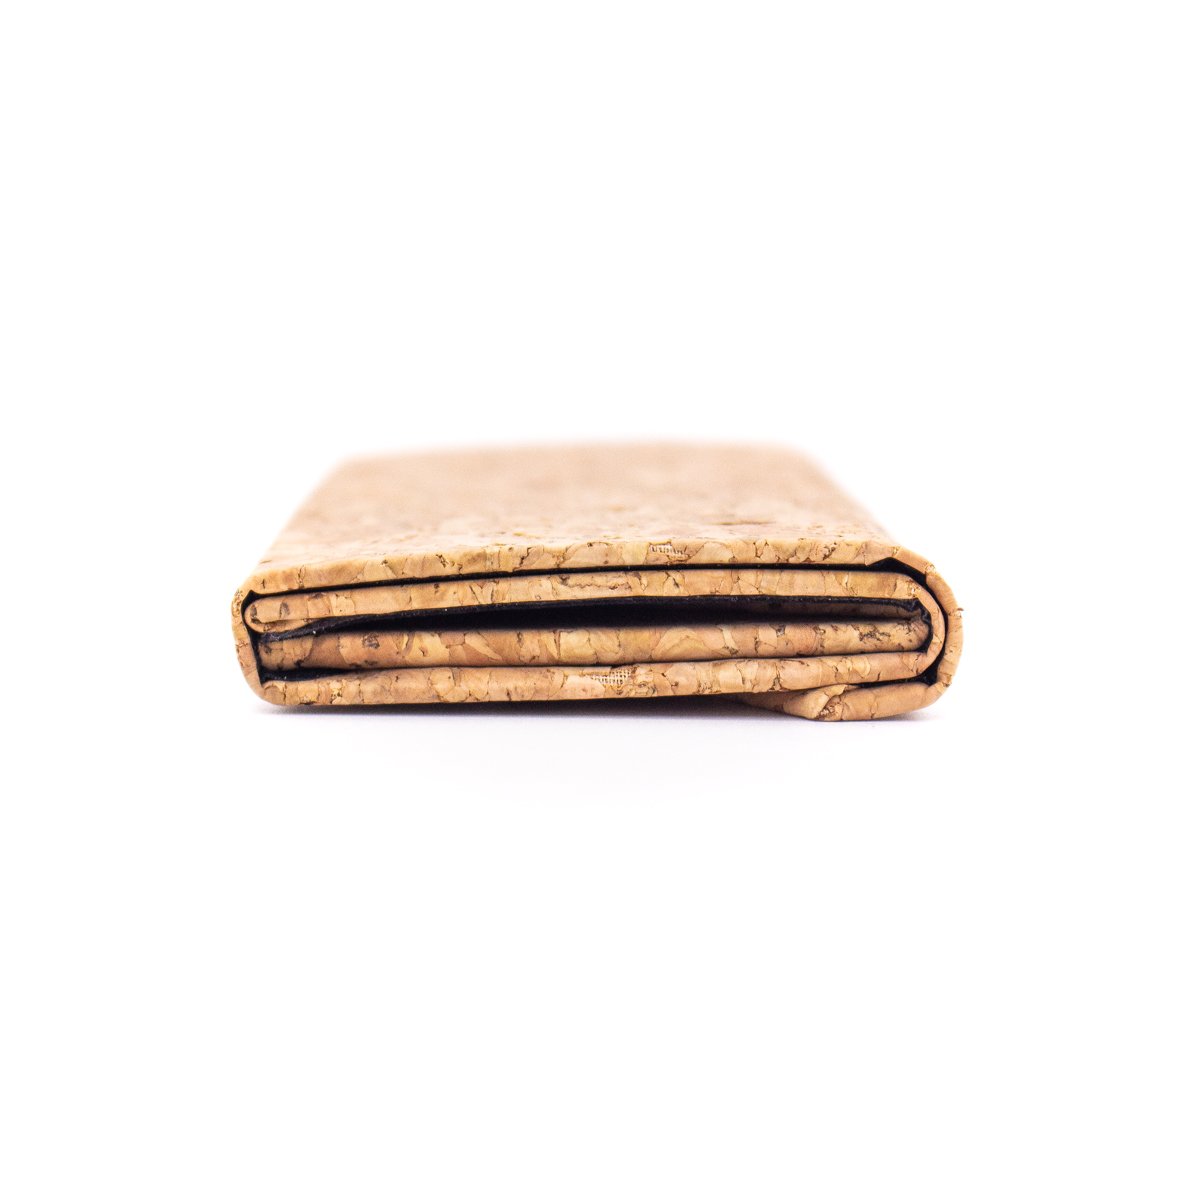 Cork Glasses Case Lined w/ Vegan Leather | THE CORK COLLECTION